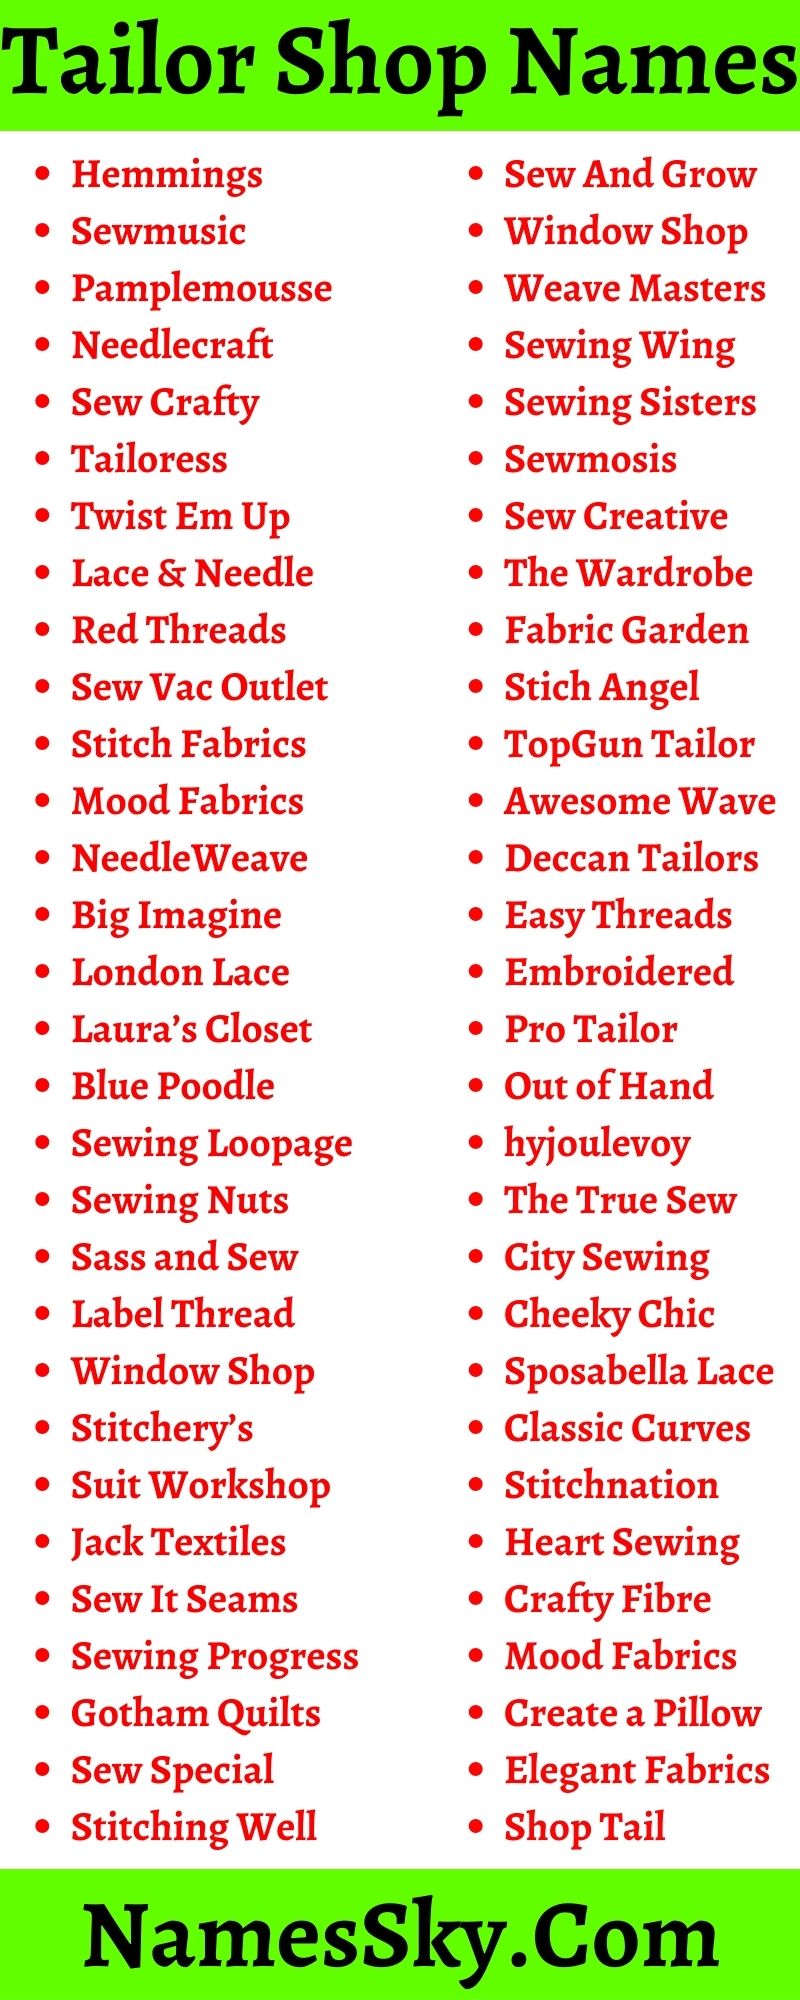 399+Tailor & Sewing Shop Names To Show Off Your Fashion Creativity